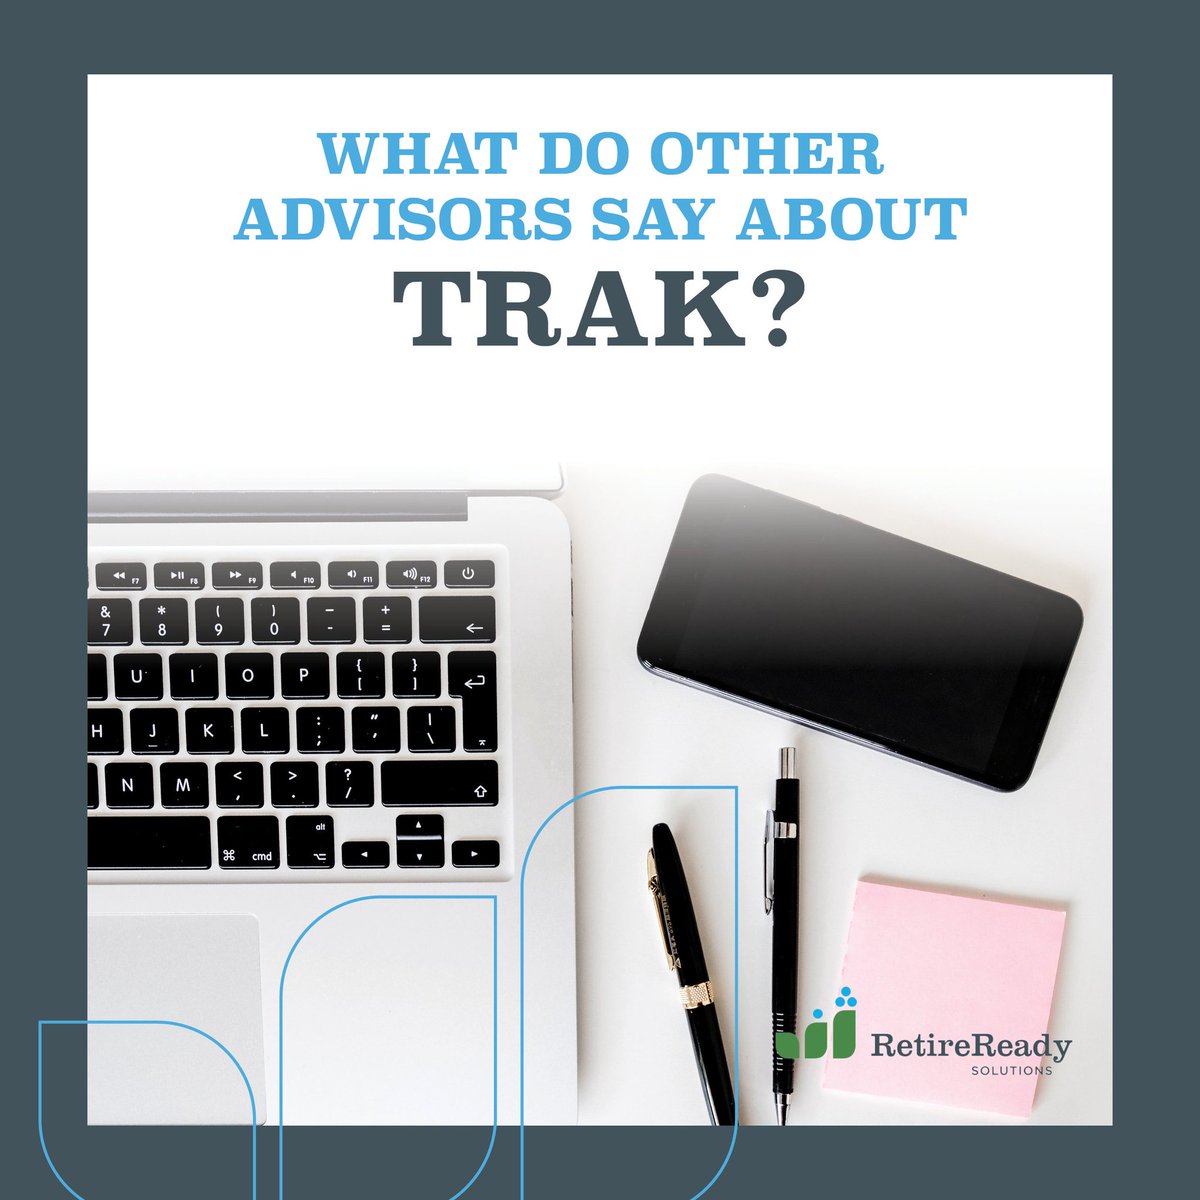 Successful 401(k) advisors all over the country are using TRAK to educate and engage plan participants, improve their meeting efficiency, and find unmanaged assets. Check out why our 401(k) advisors love TRAK! retireready.com/401k-advisors/ #RetireReady #RetirementPlanning #TRAK